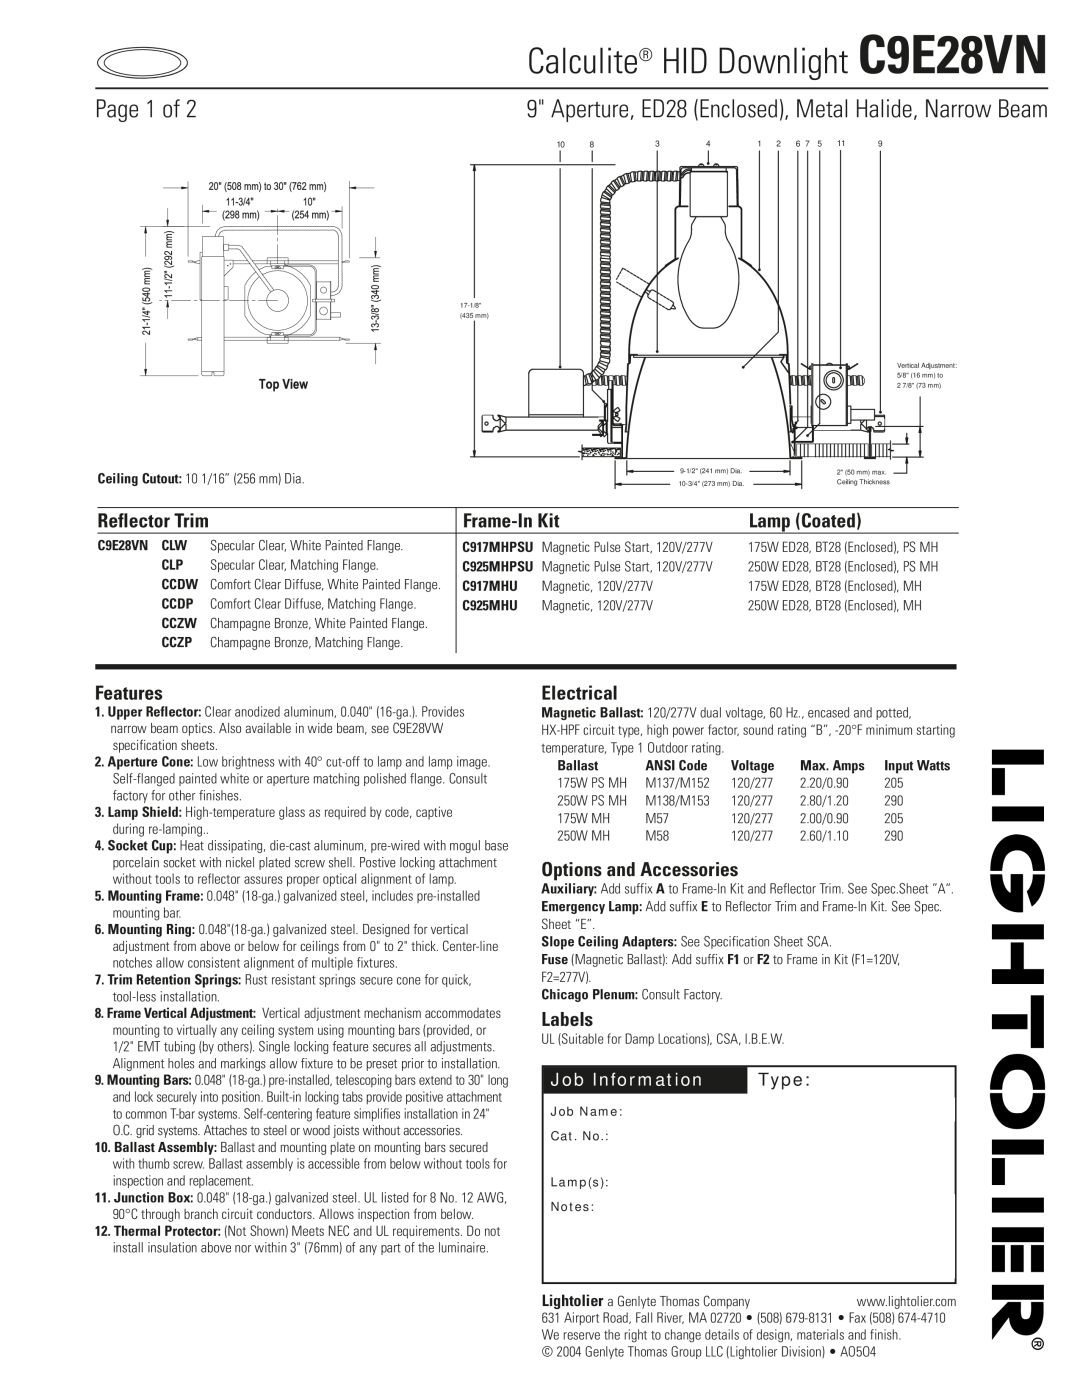 Lightolier specifications Job Information, Type, Calculite HID Downlight C9E28VN, Page 1 of, Frame-InKit, Lamp Coated 